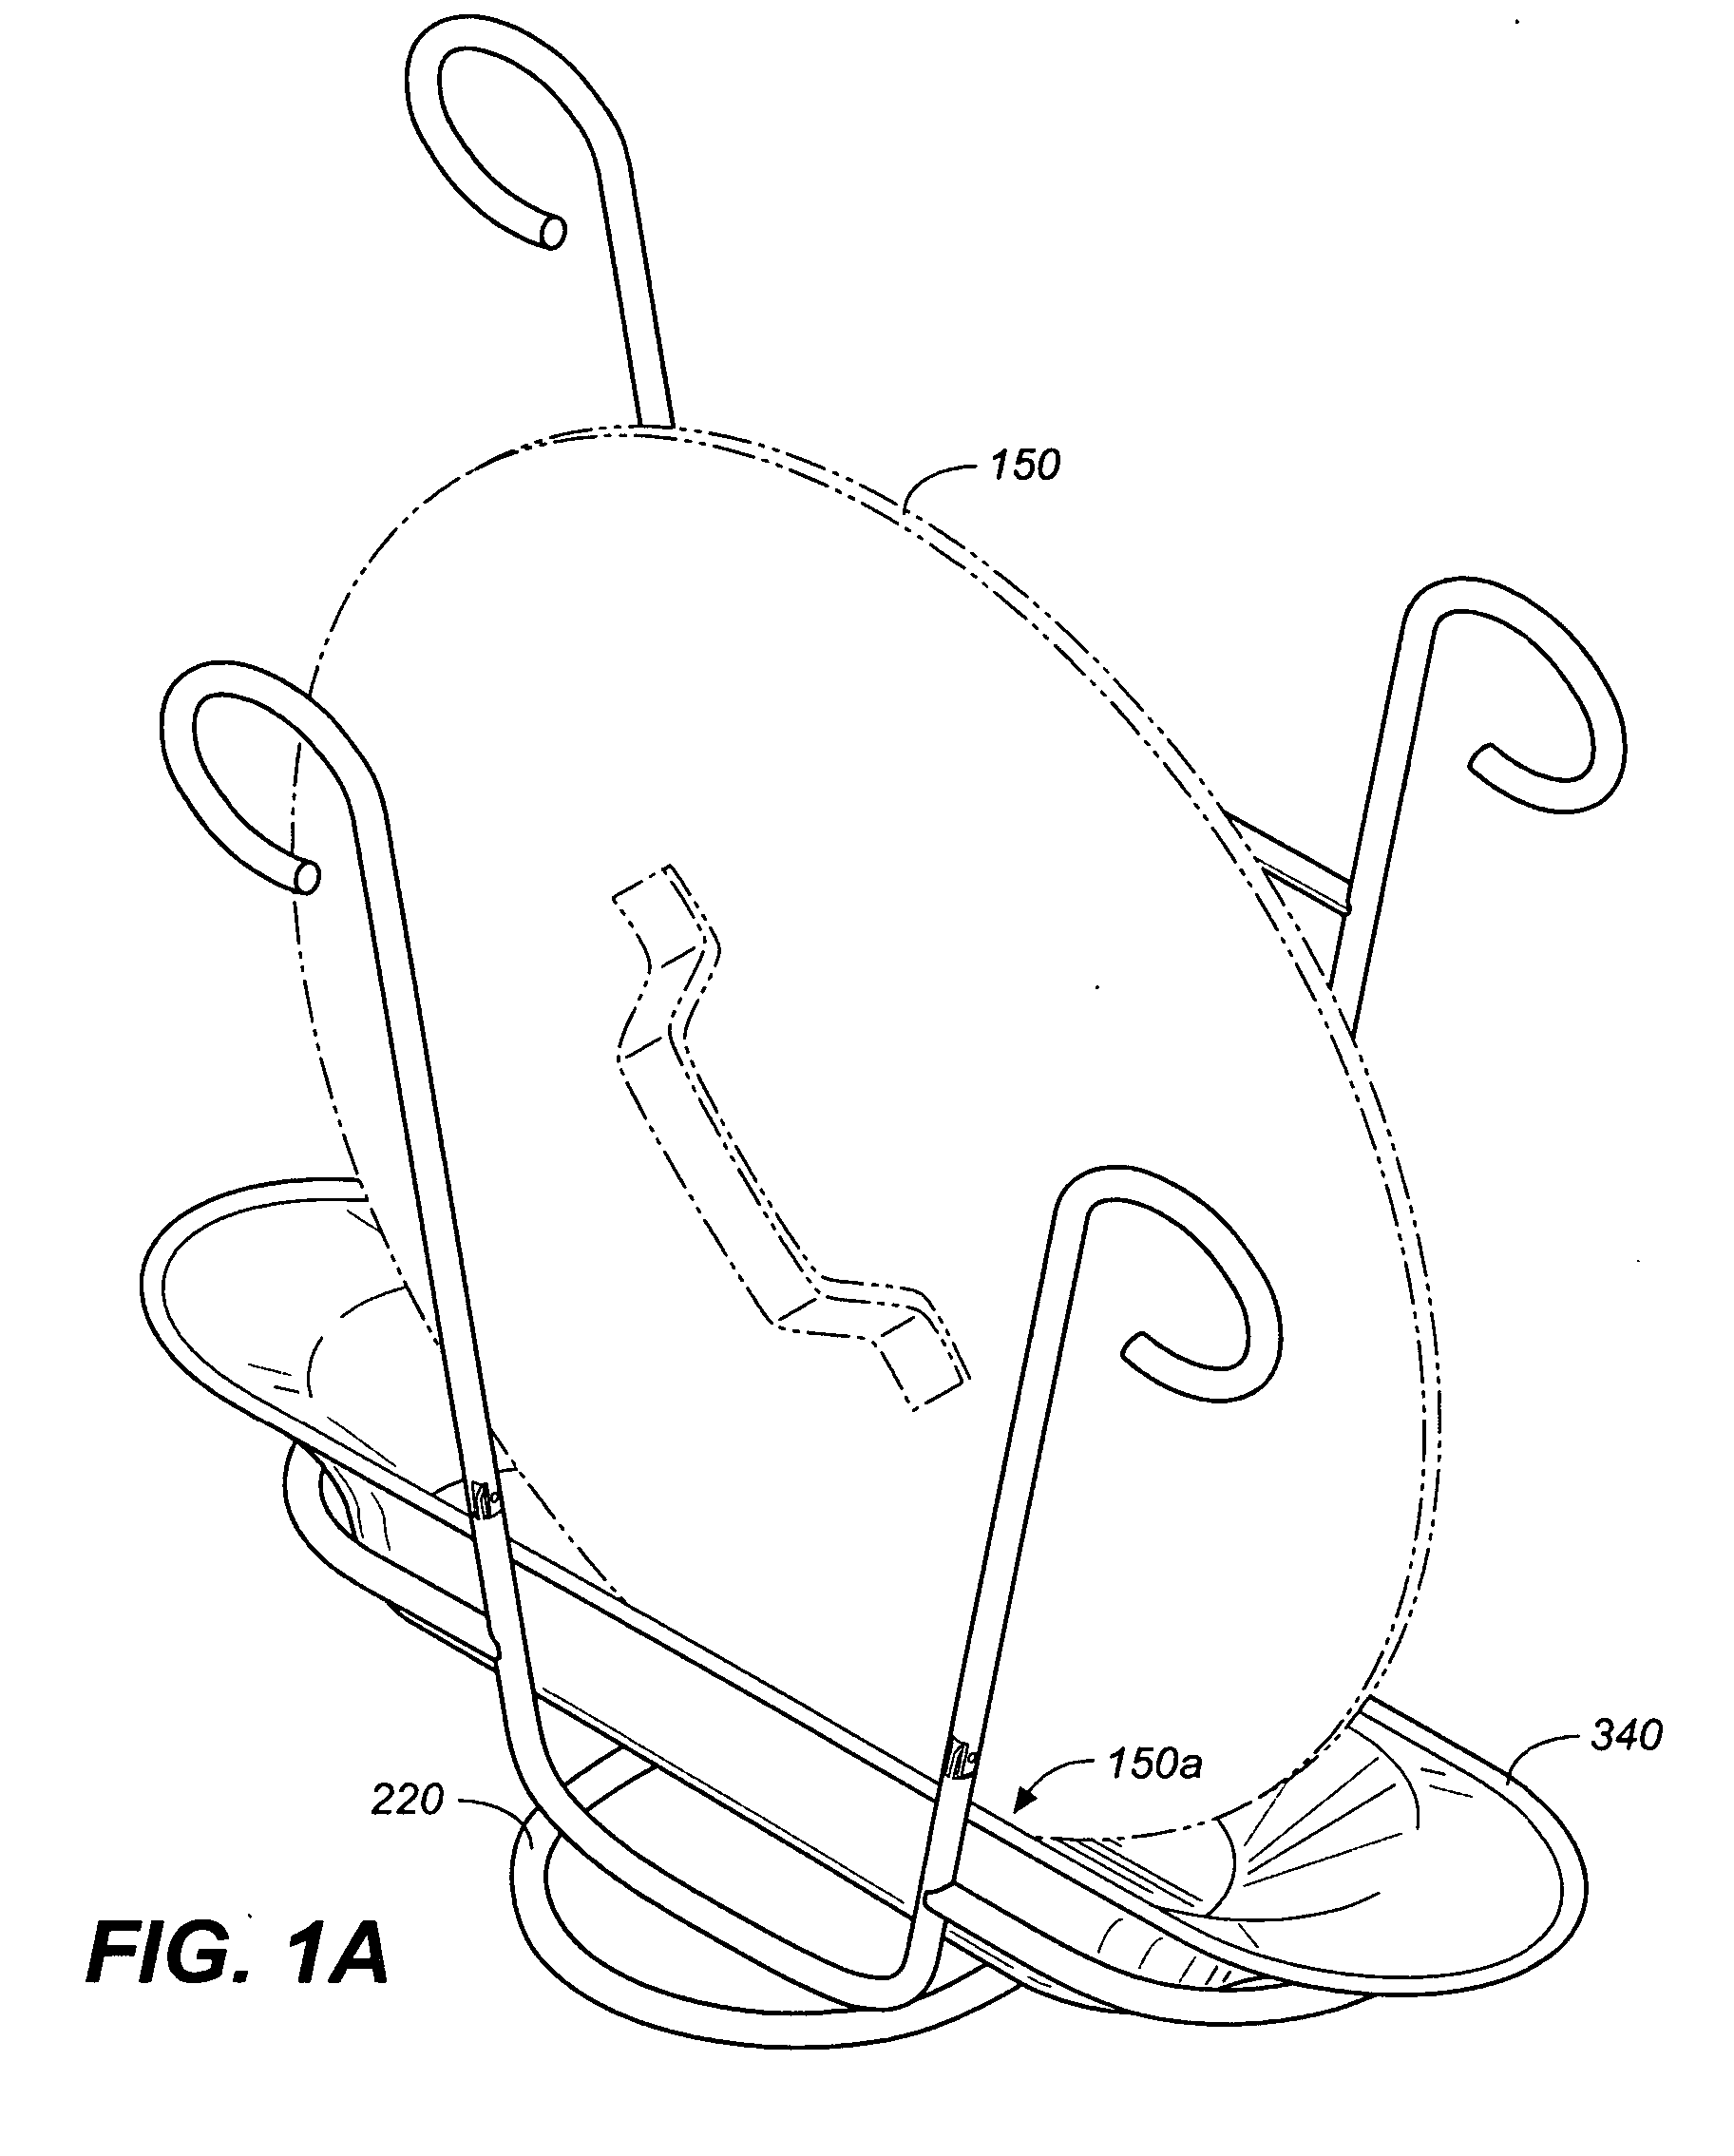 Cooking vessel lid holder with drip collection apparatus